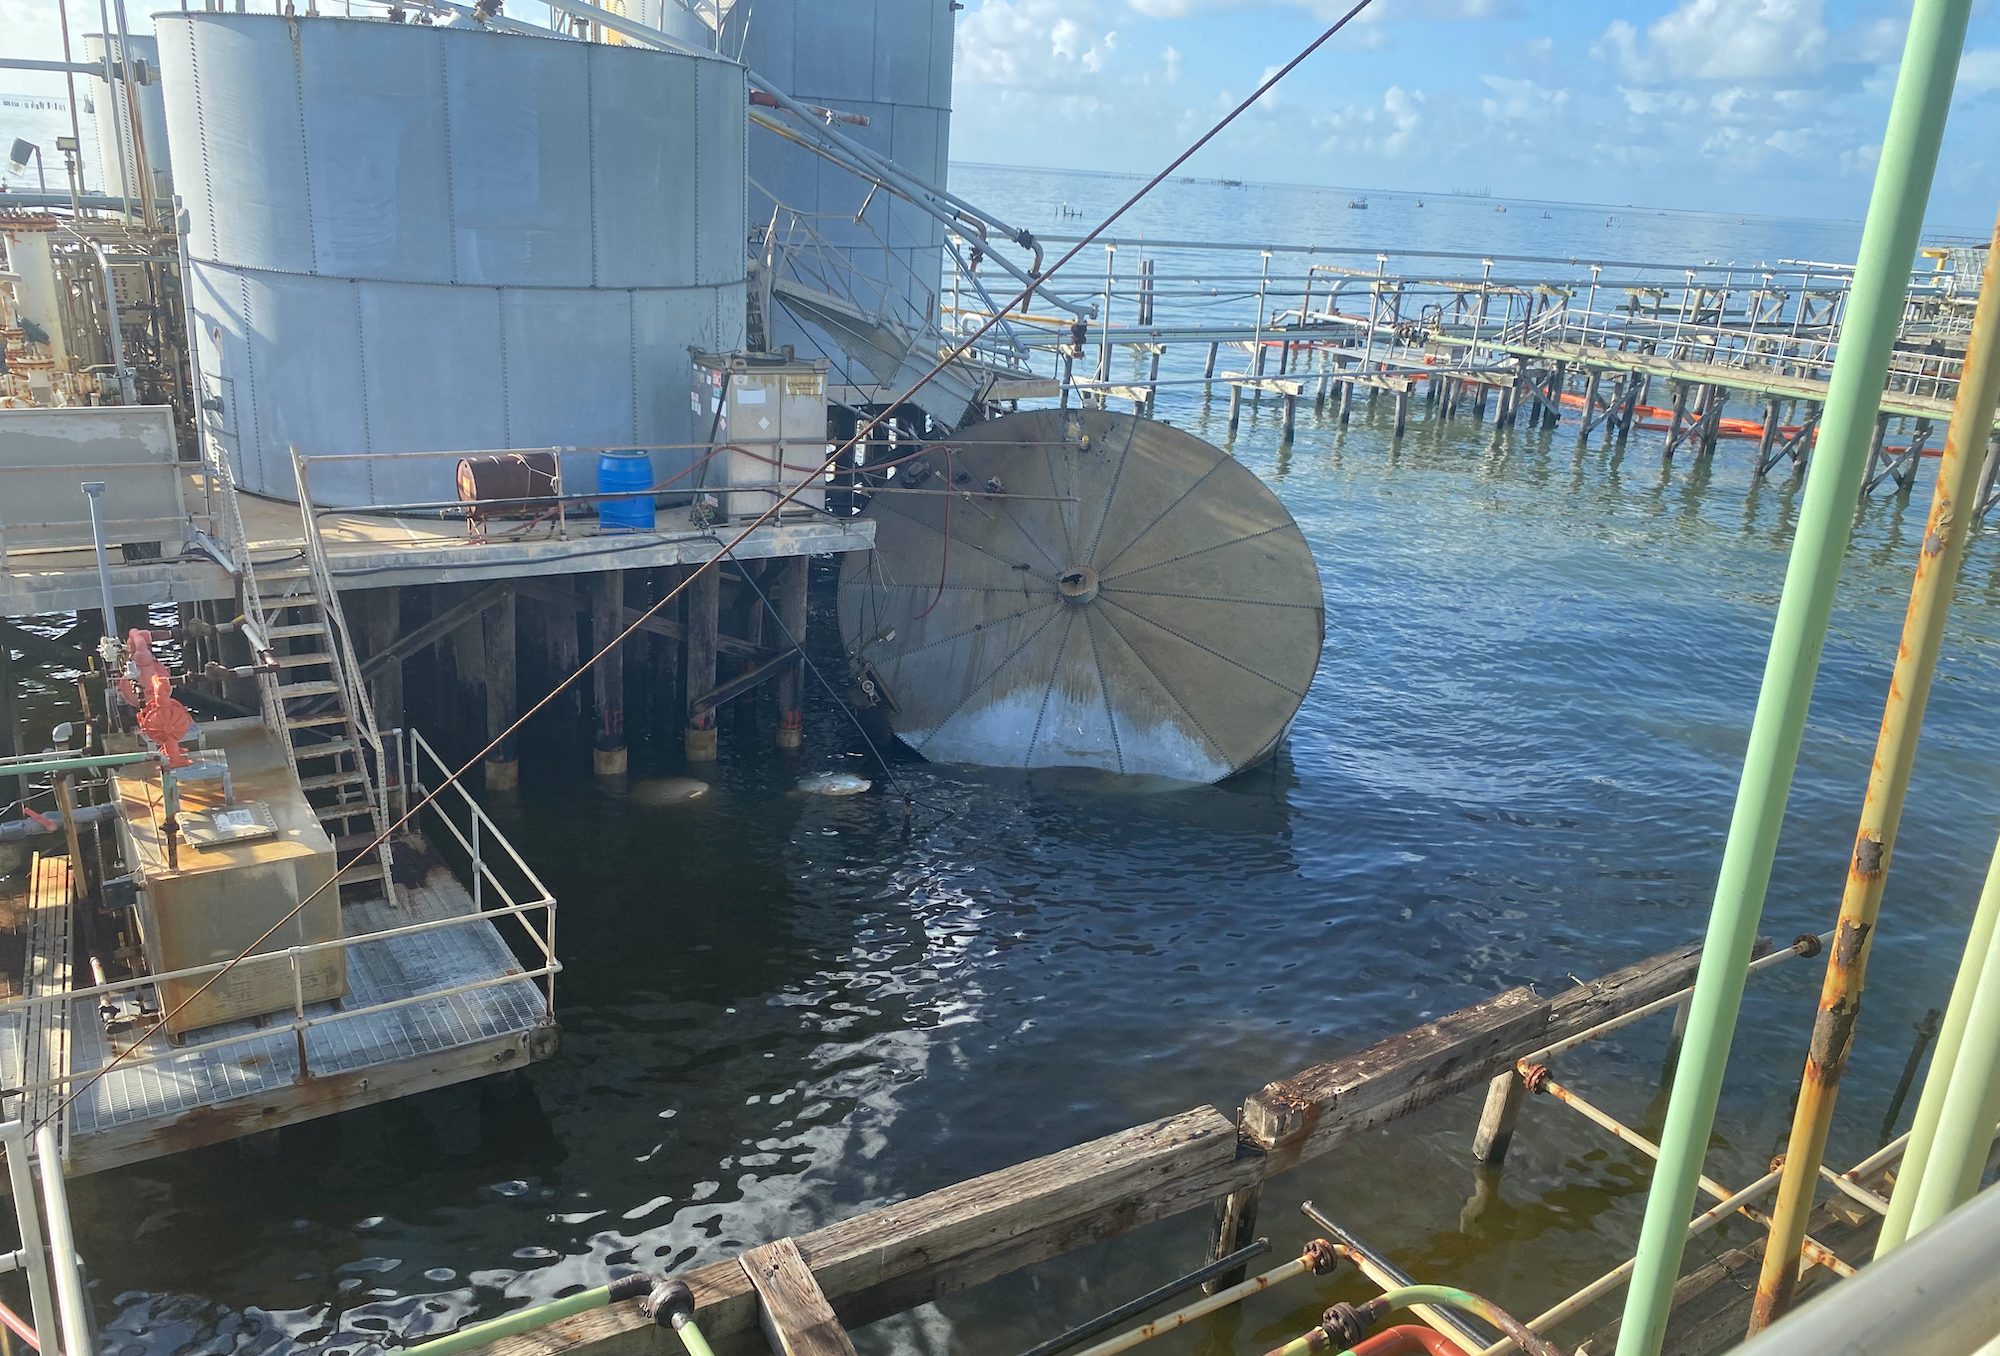 Coast Guard Responds to Oil Spill at Offshore Platform in Terrebonne Bay, Louisiana